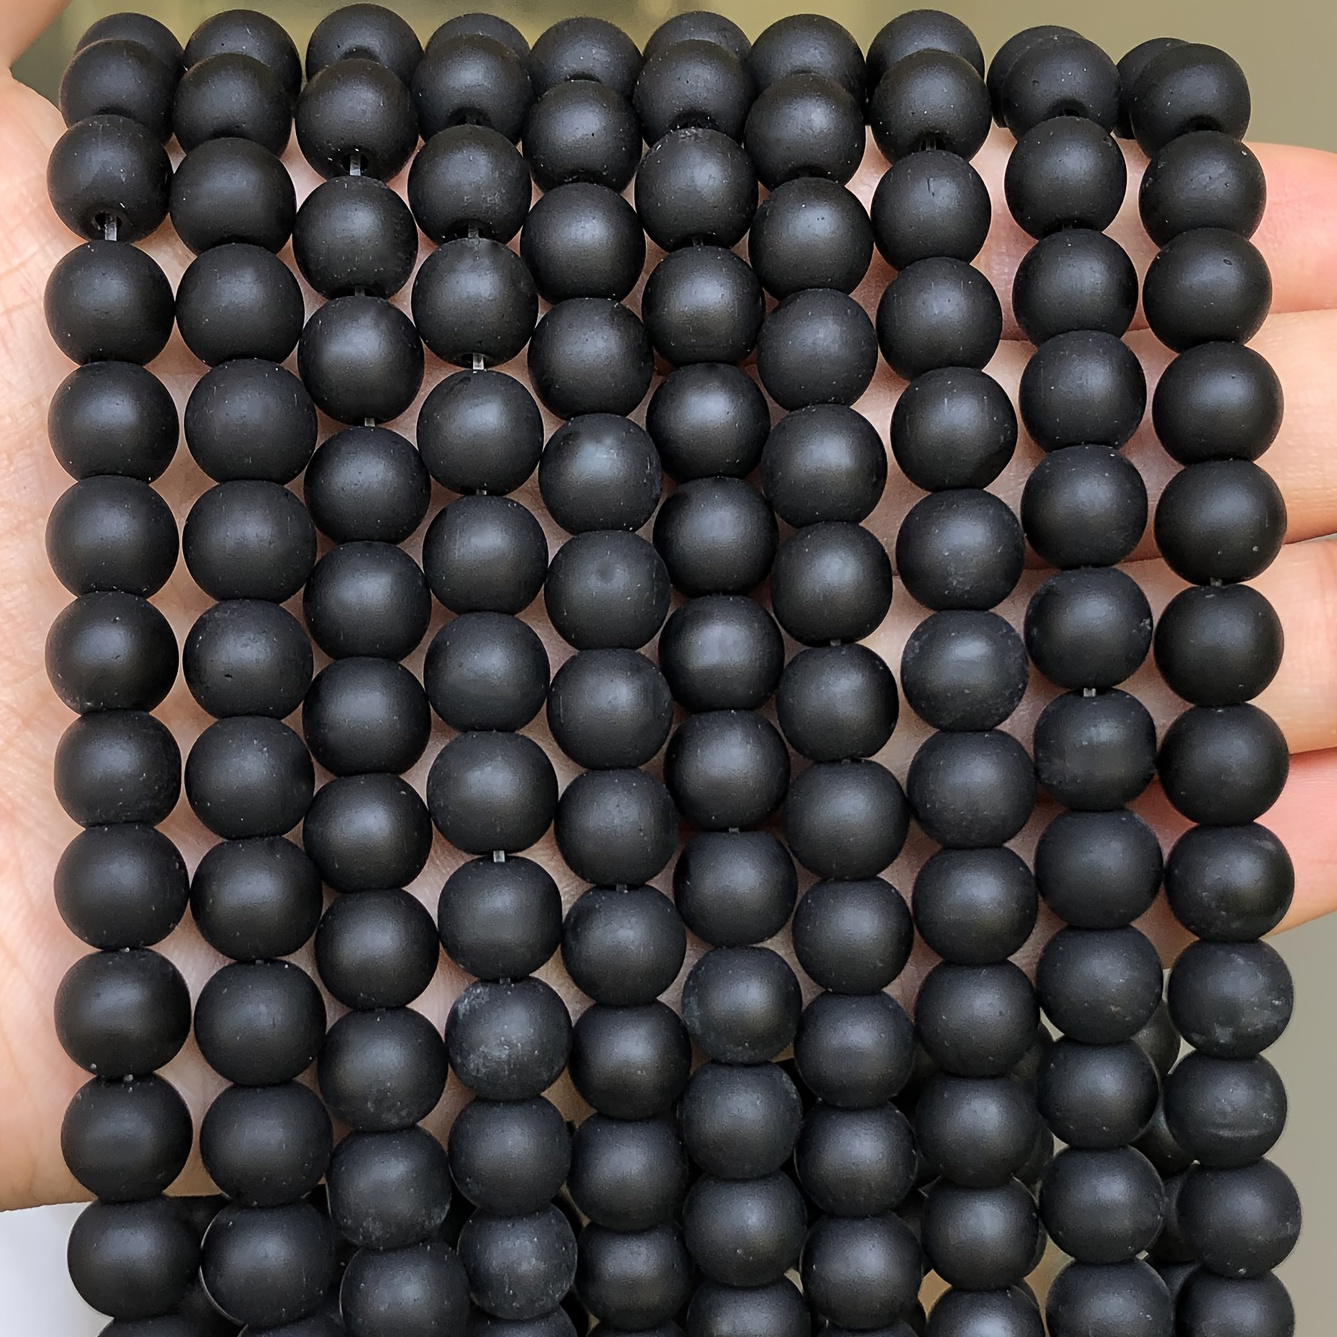 

4-12mm Natural Stone Black Onyx Fashion Round Loose Spacer Beads For Jewelry Making Diy Special Bracelets Necklace Man Women Gift Craft Supplies